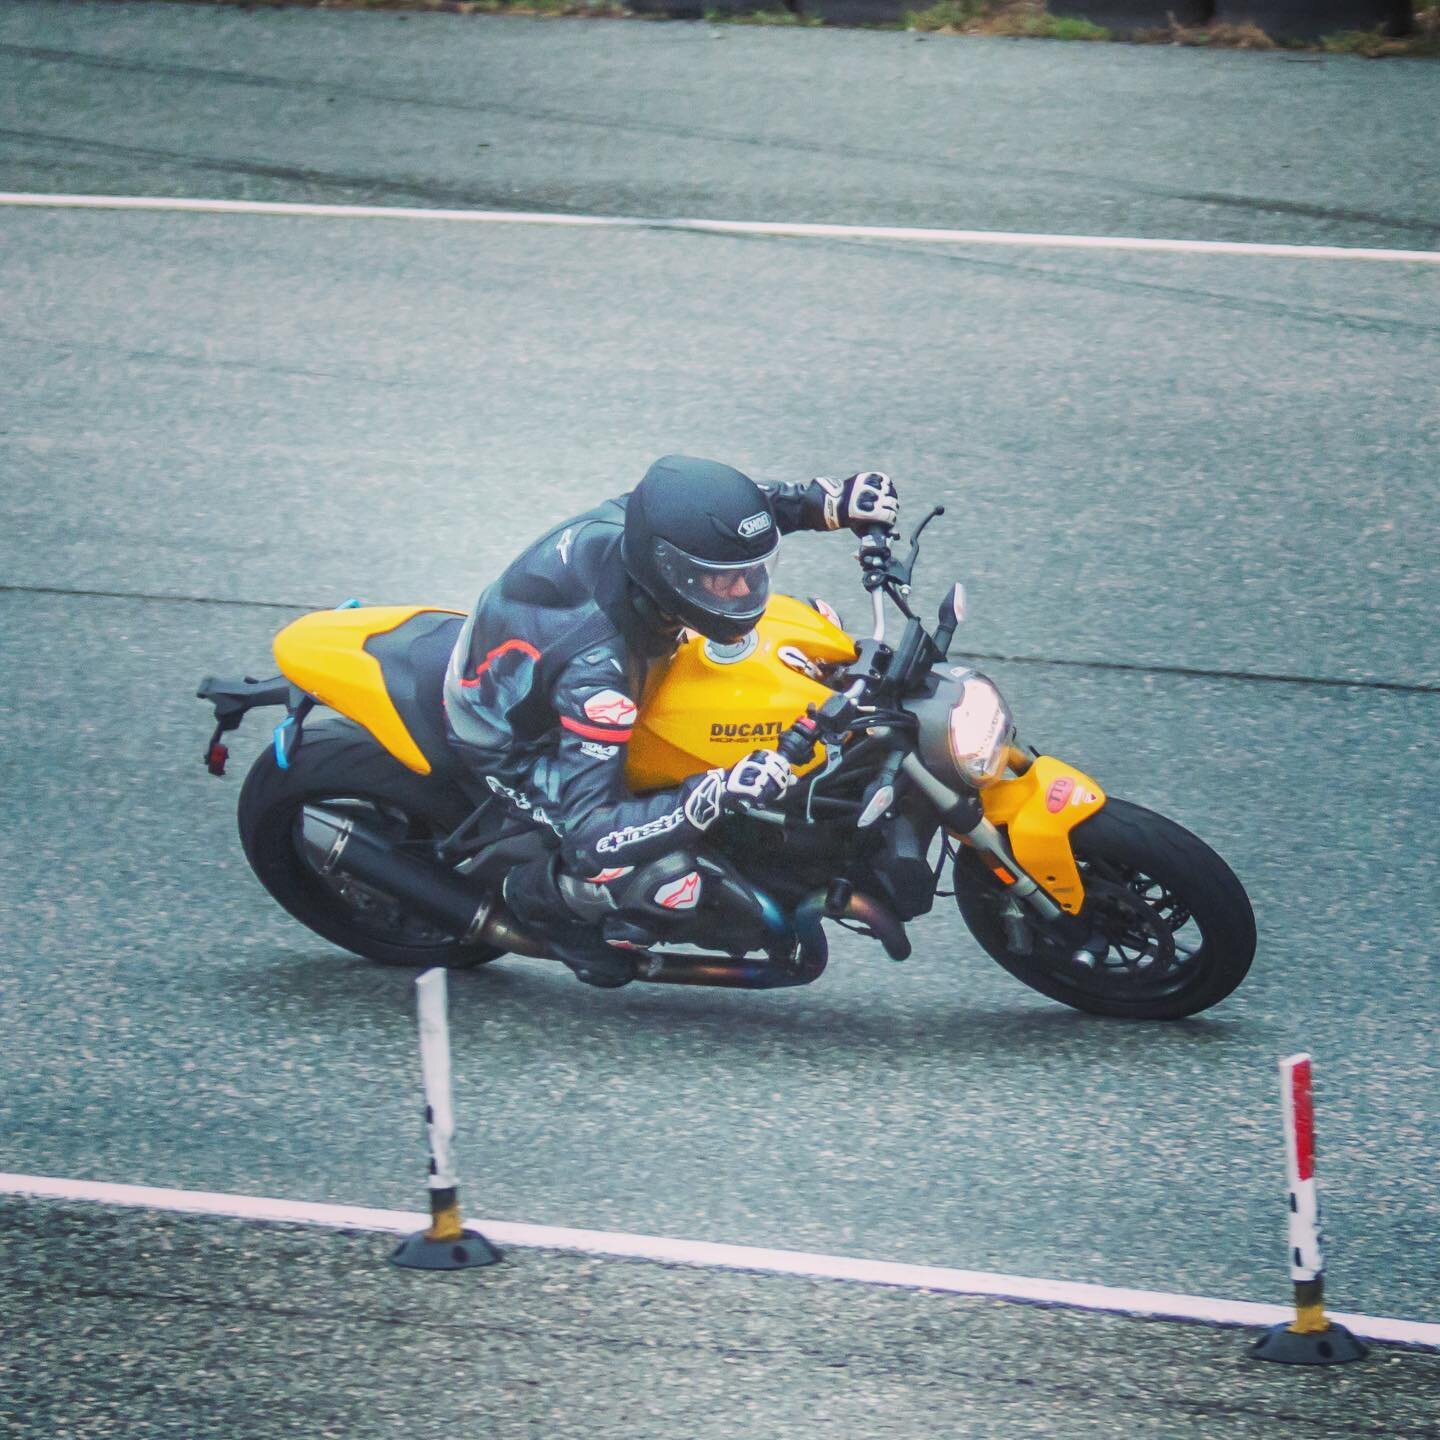 Building adventures and play into each week broadens perspective. Track days deliver peak experiences through camaraderie, building confidence, developing skills, and overcoming fear. The day started with heavy rains with slippery corners gradually d